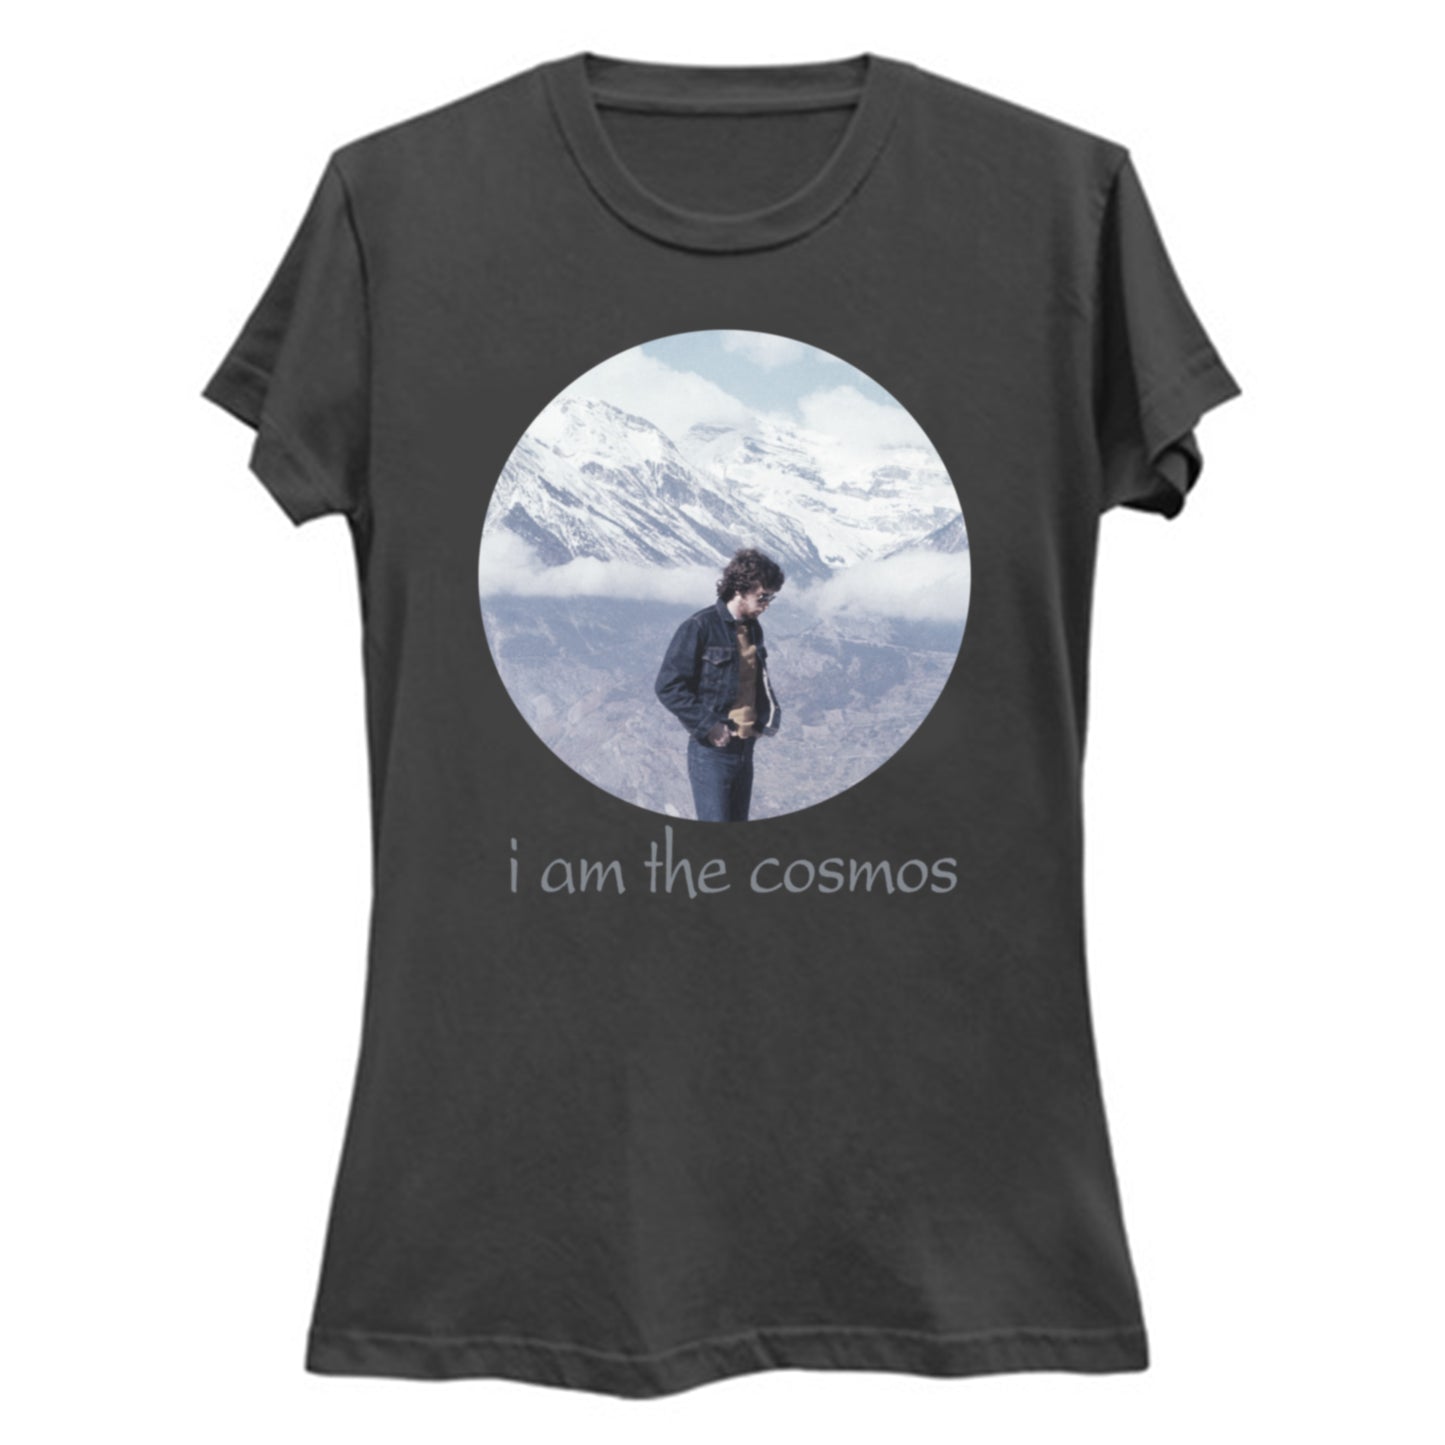 Chris Bell (Big Star) I Am The Cosmos T-Shirt (Various Colors)